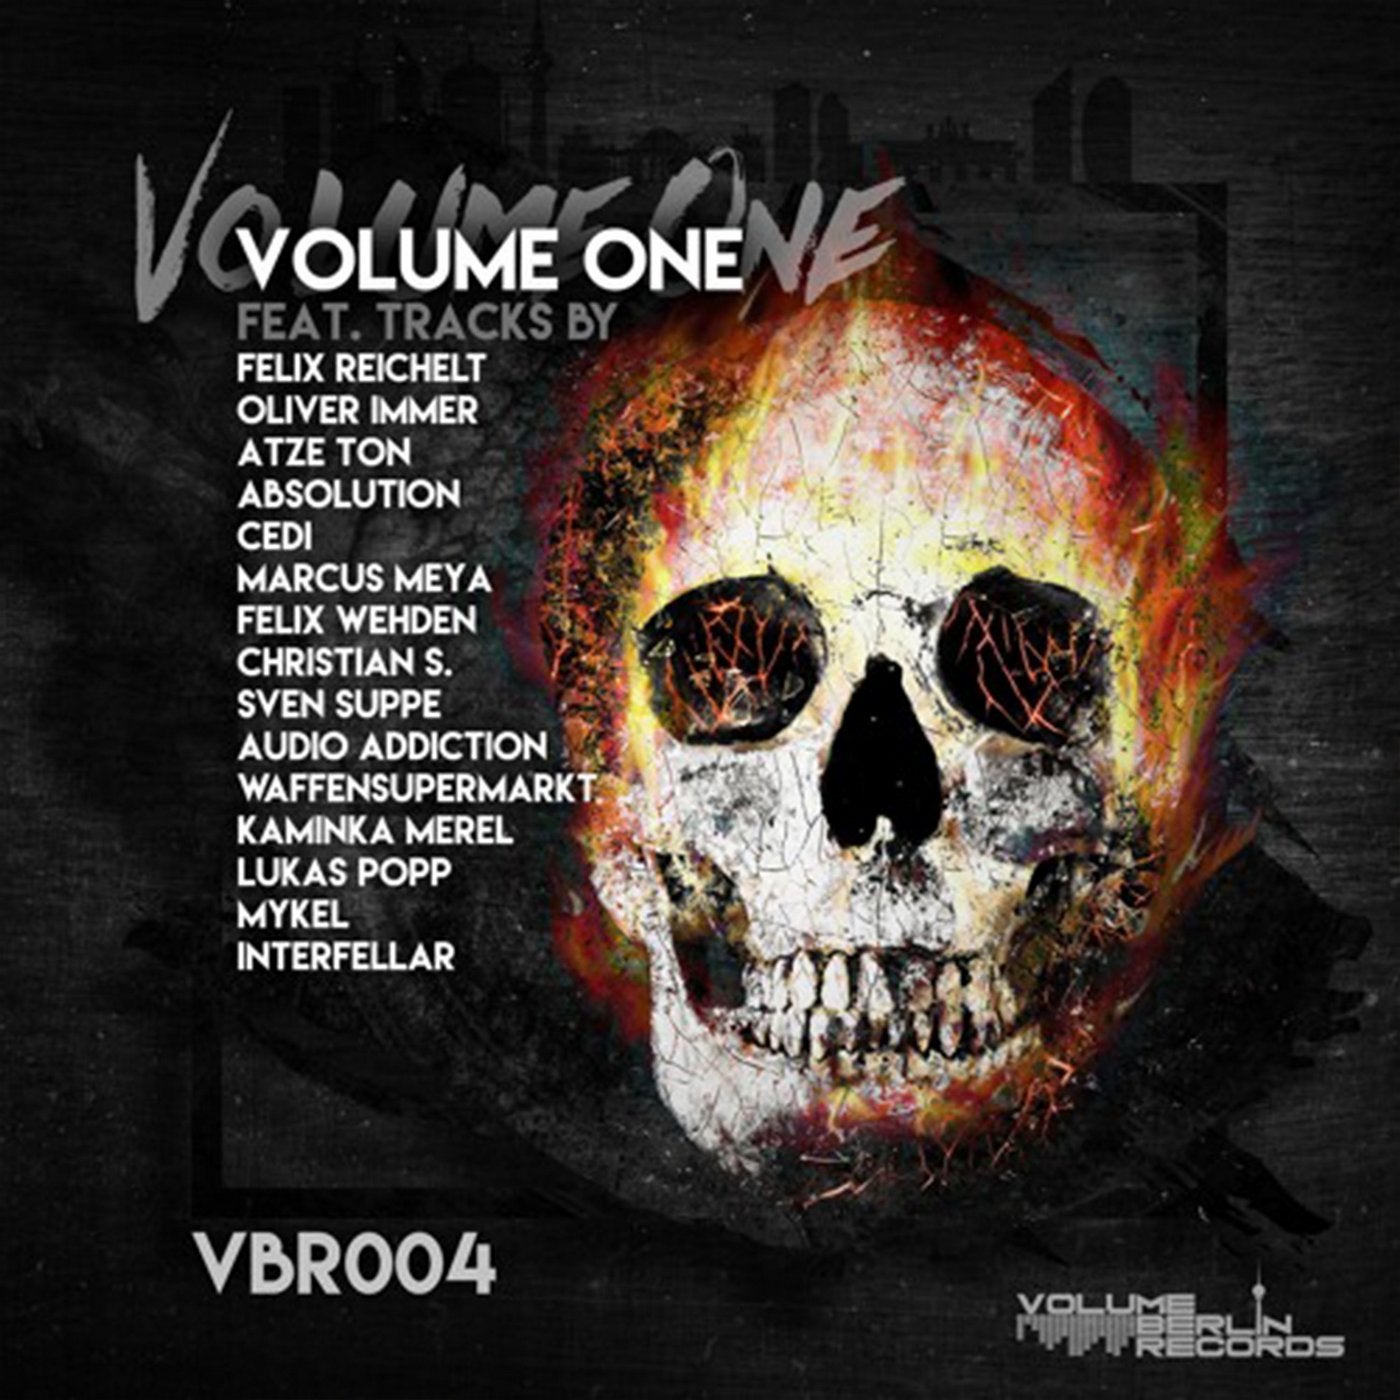 Vol. One Compilation